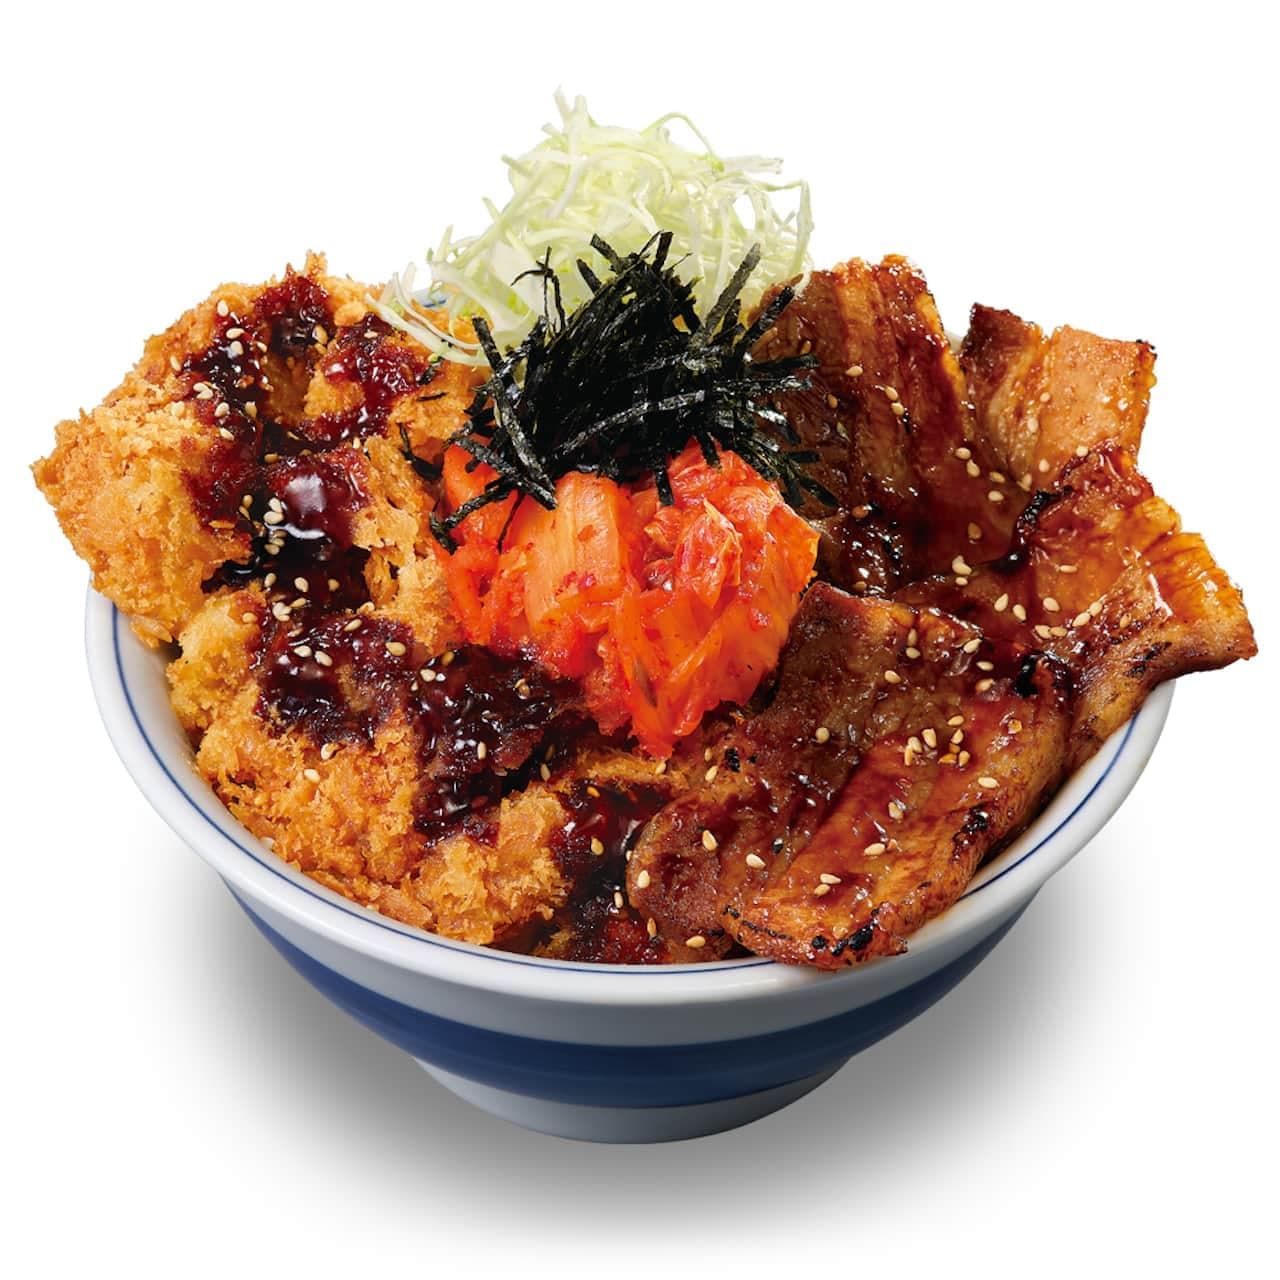 Katsuya "Bowl of rice topped with grilled pork ribs and chicken cutlet